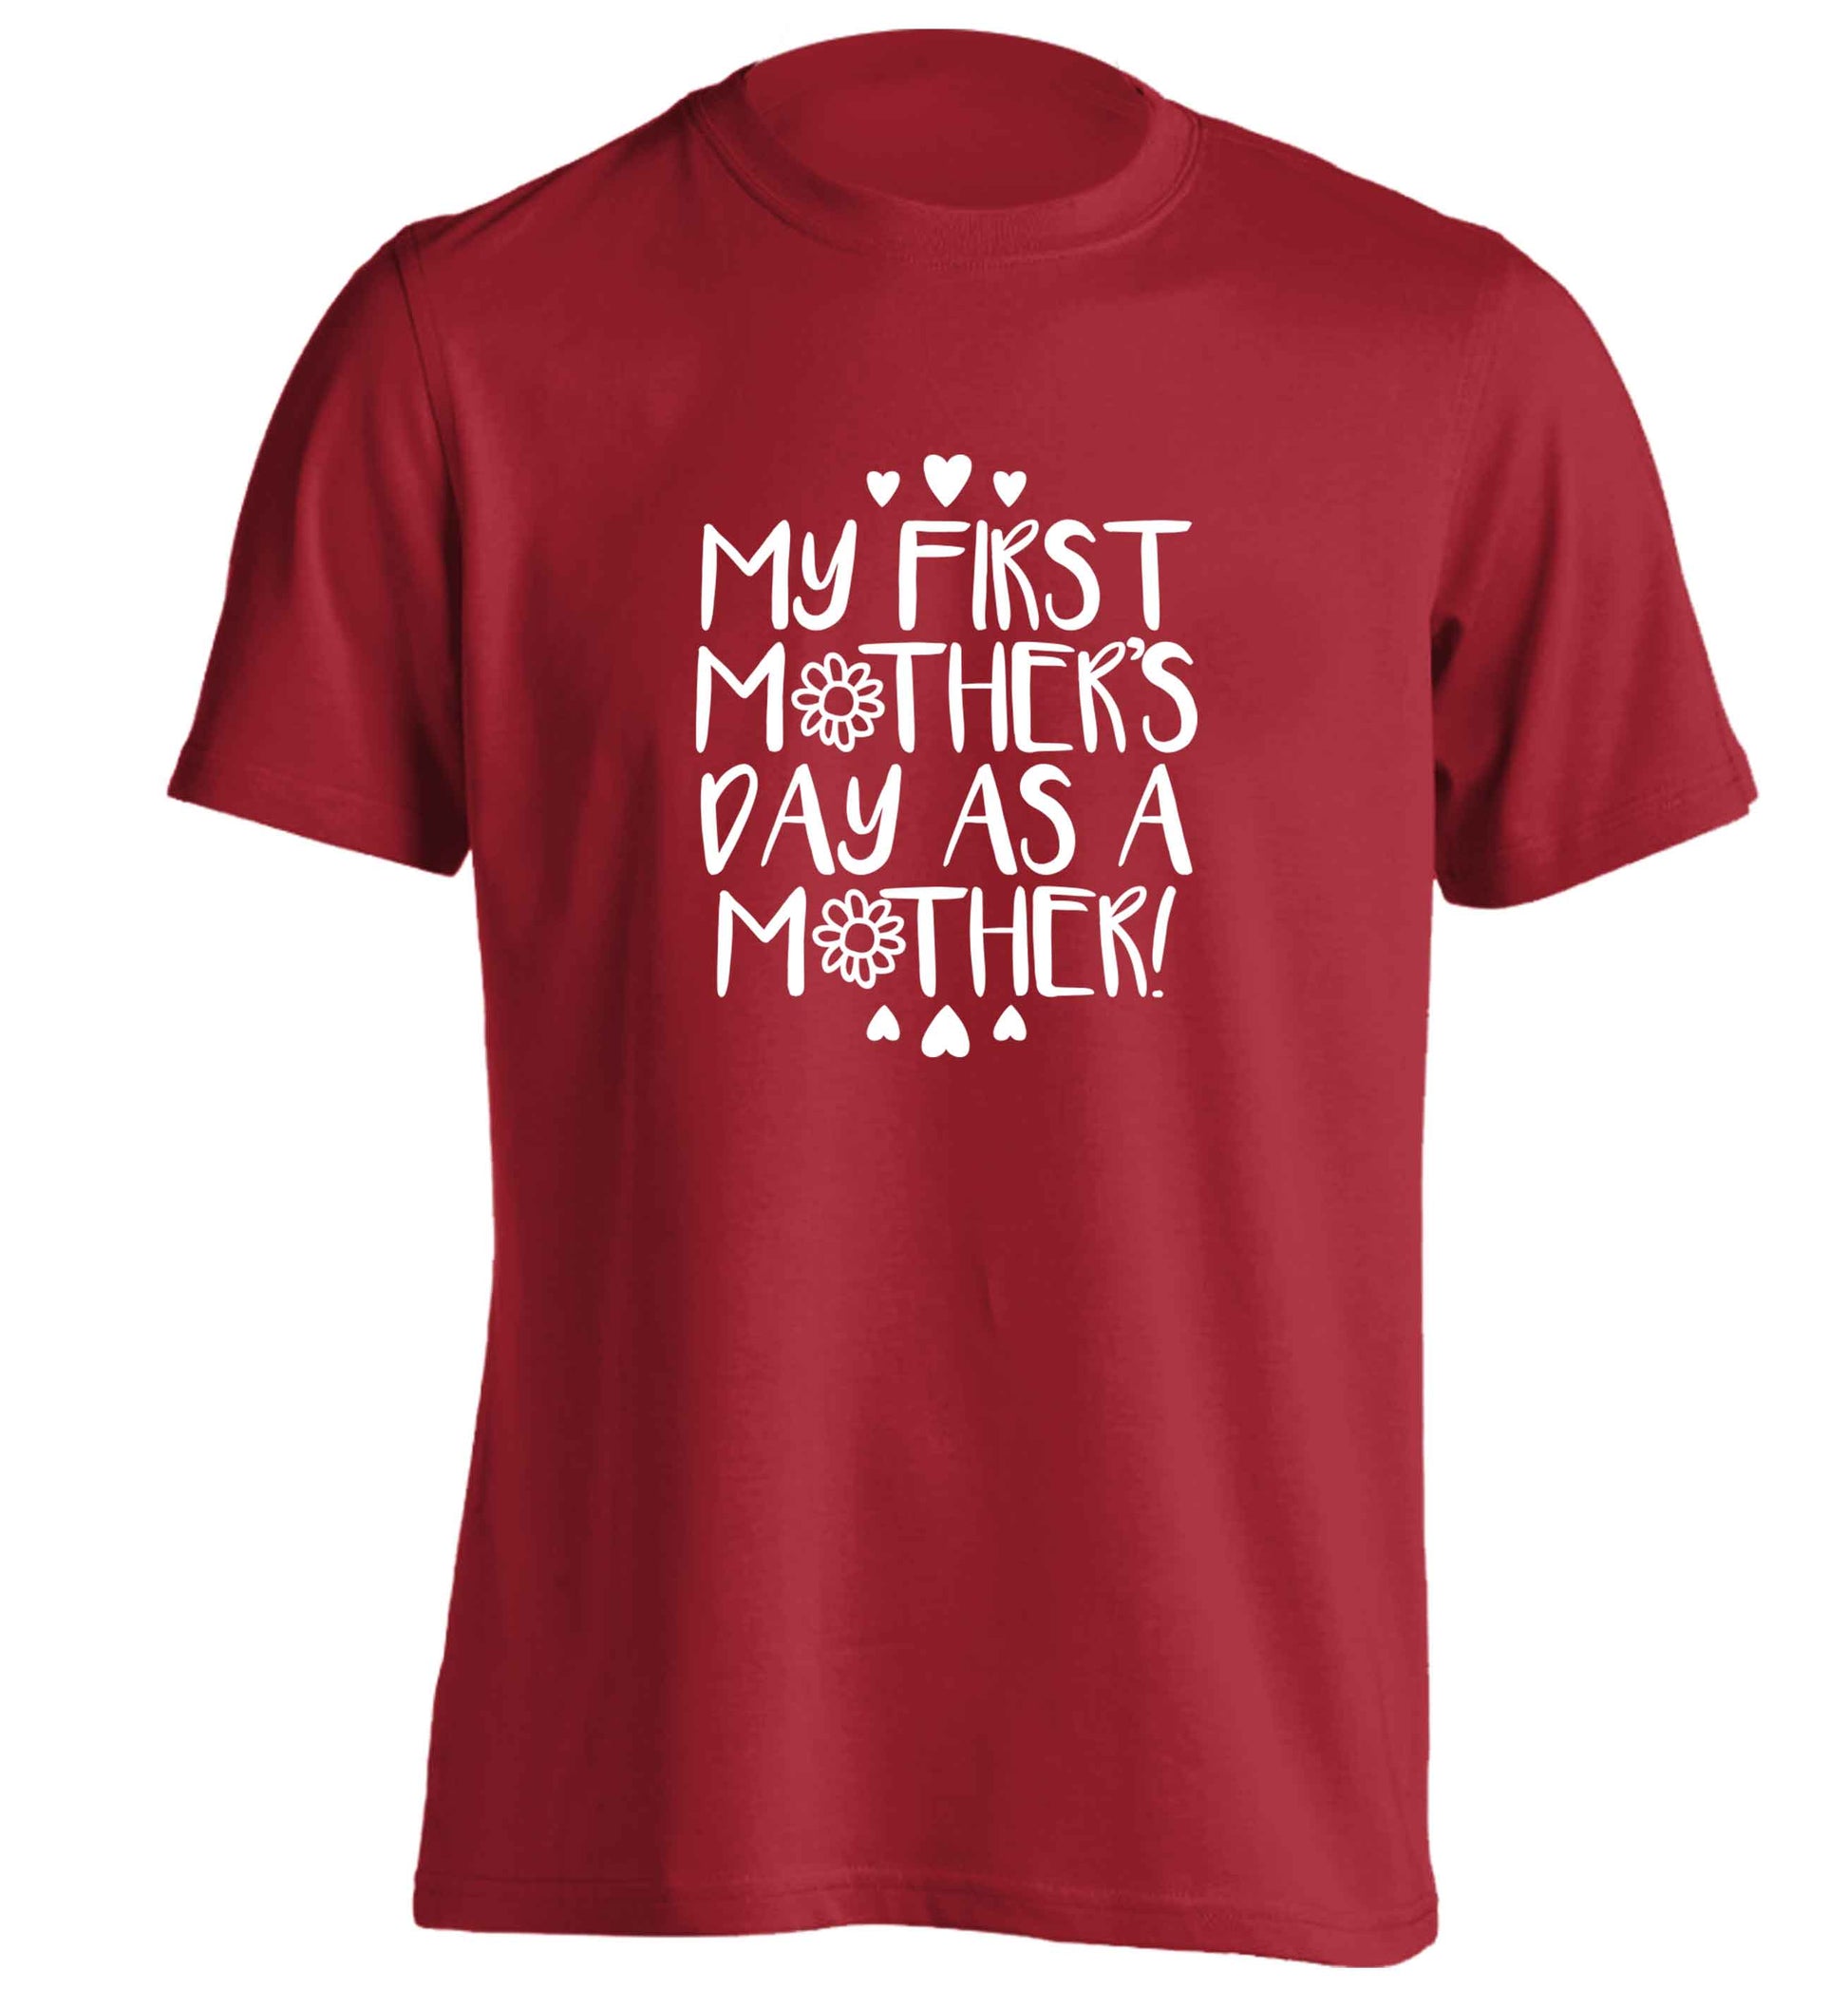 It's my first mother's day as a mother adults unisex red Tshirt 2XL